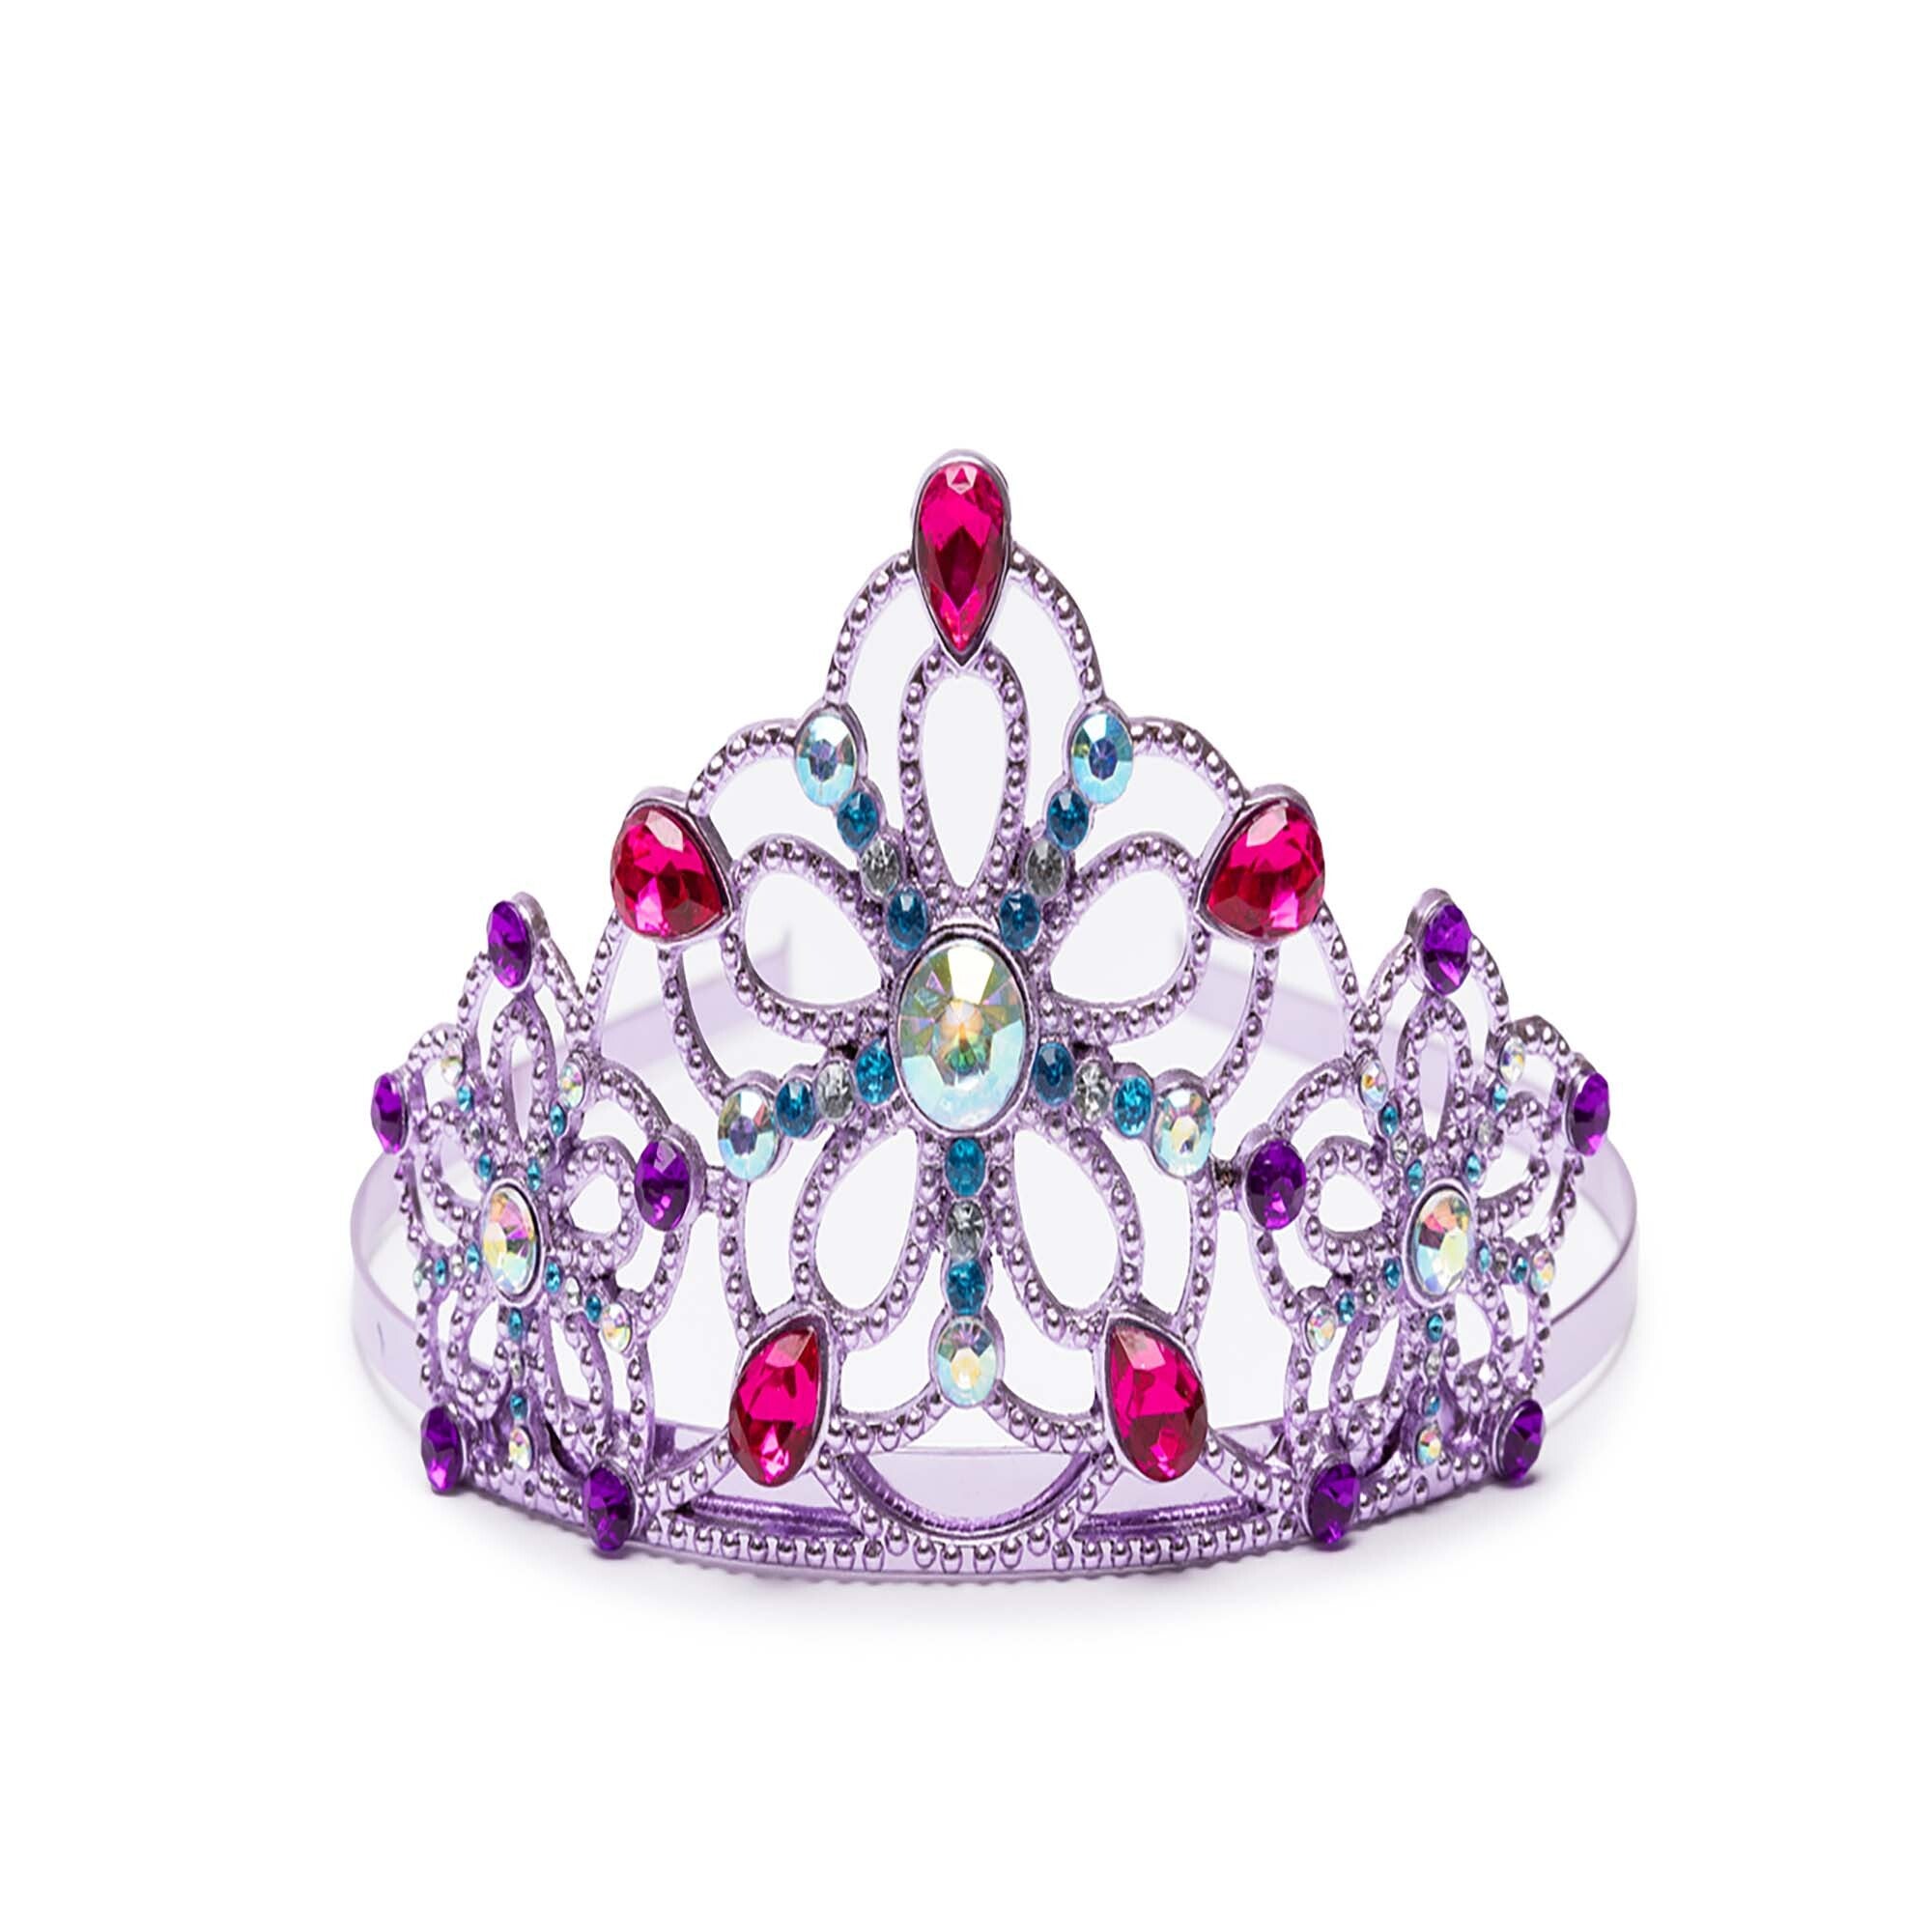 Lilac Be Jewelled Tiara, 1 Count